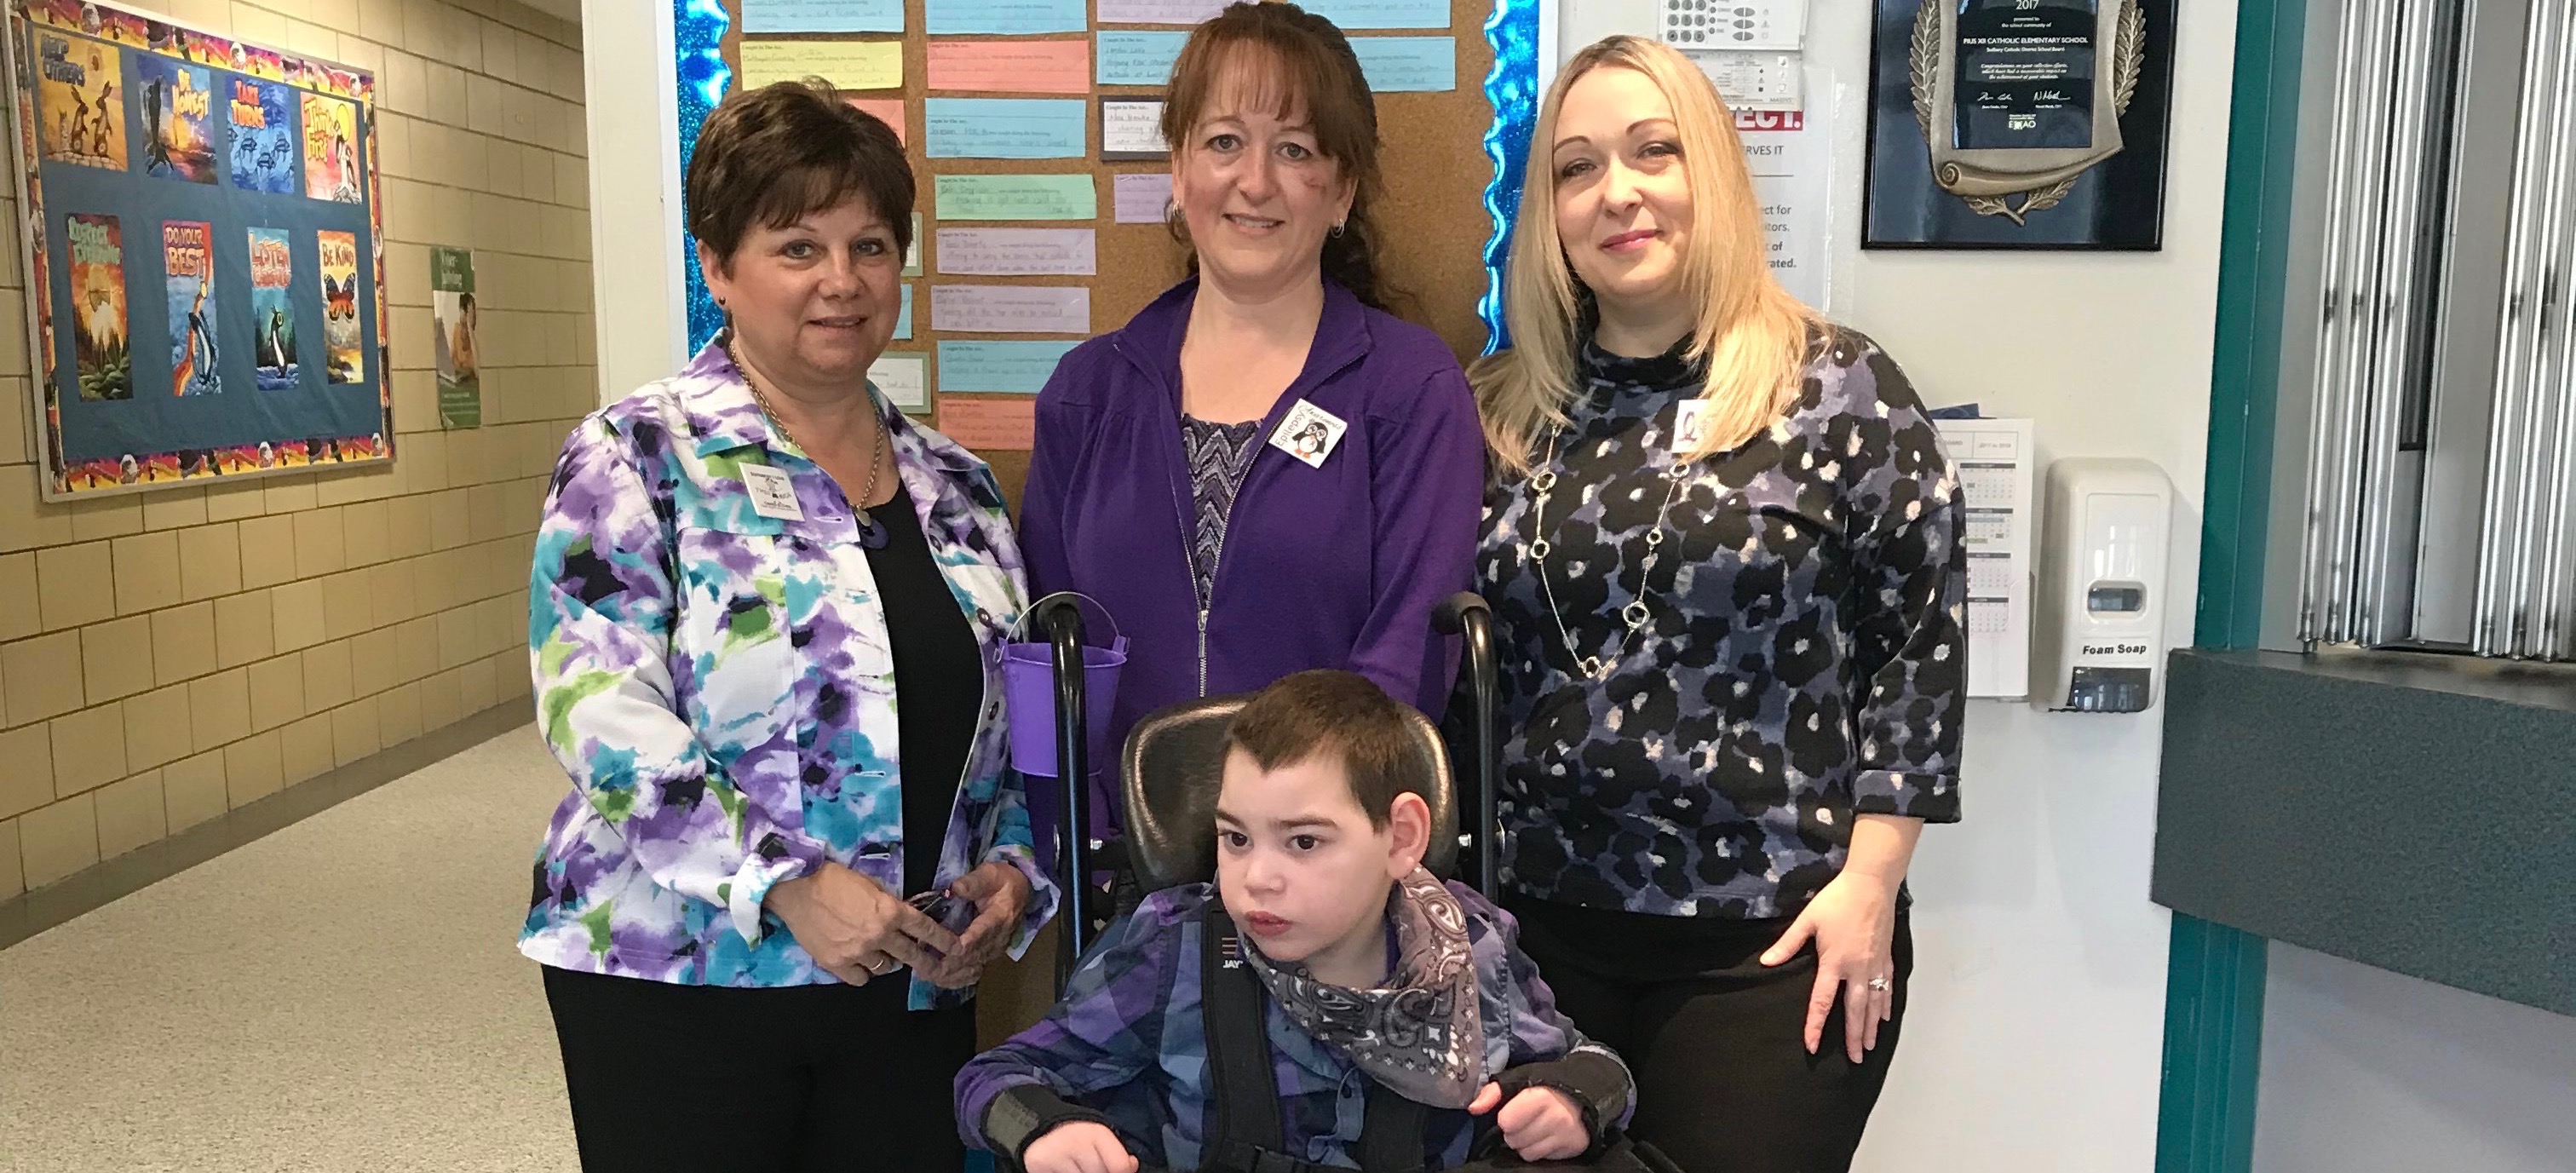 Three teachers at Pius XII School stand with a lifeskills student to promote epilepsy awareness.